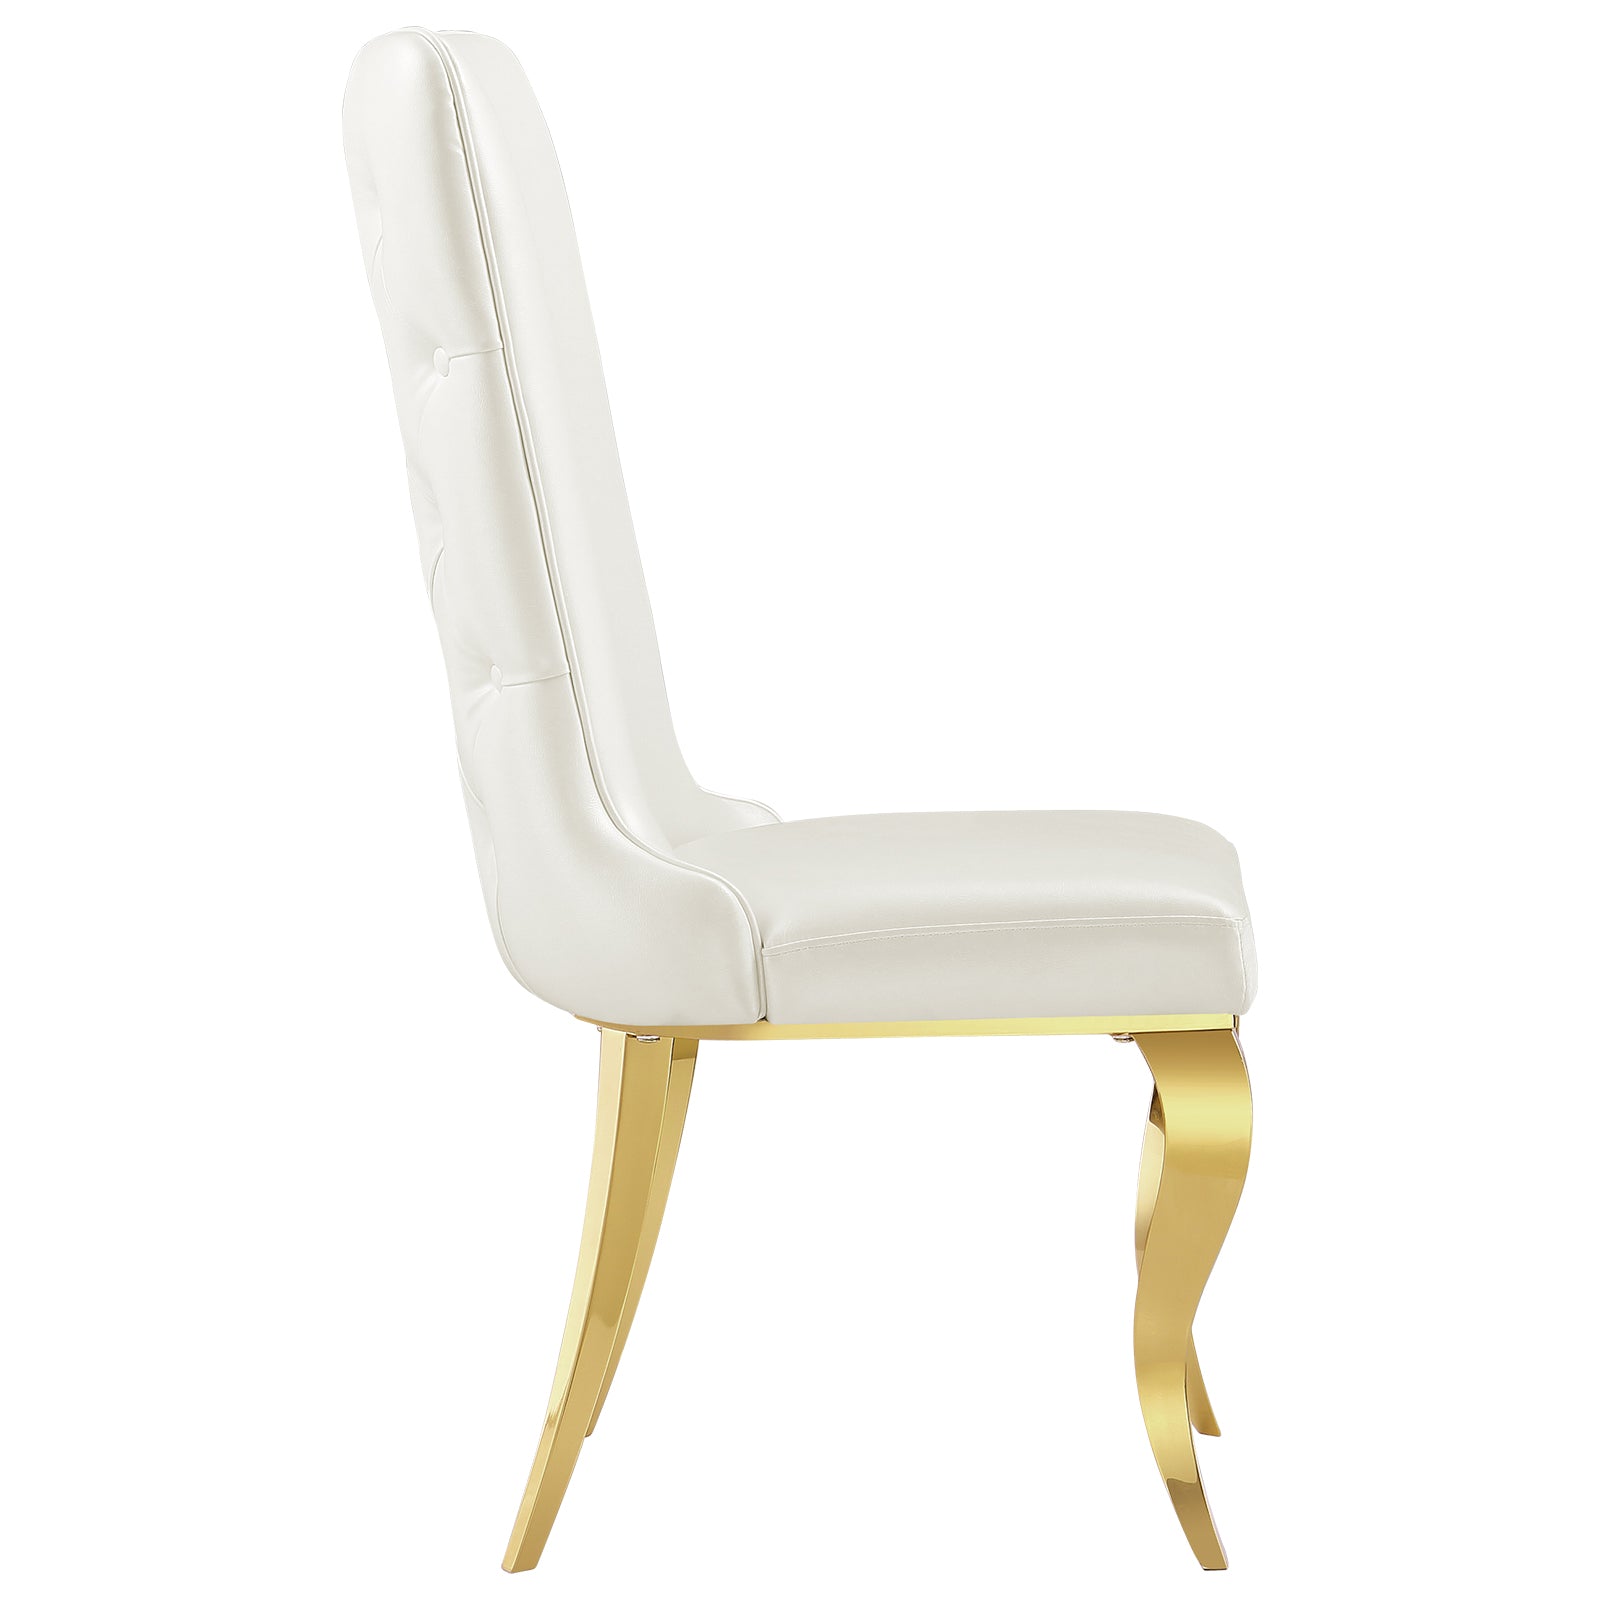 690 Set | AUZ White and Gold Dining room Sets for 6